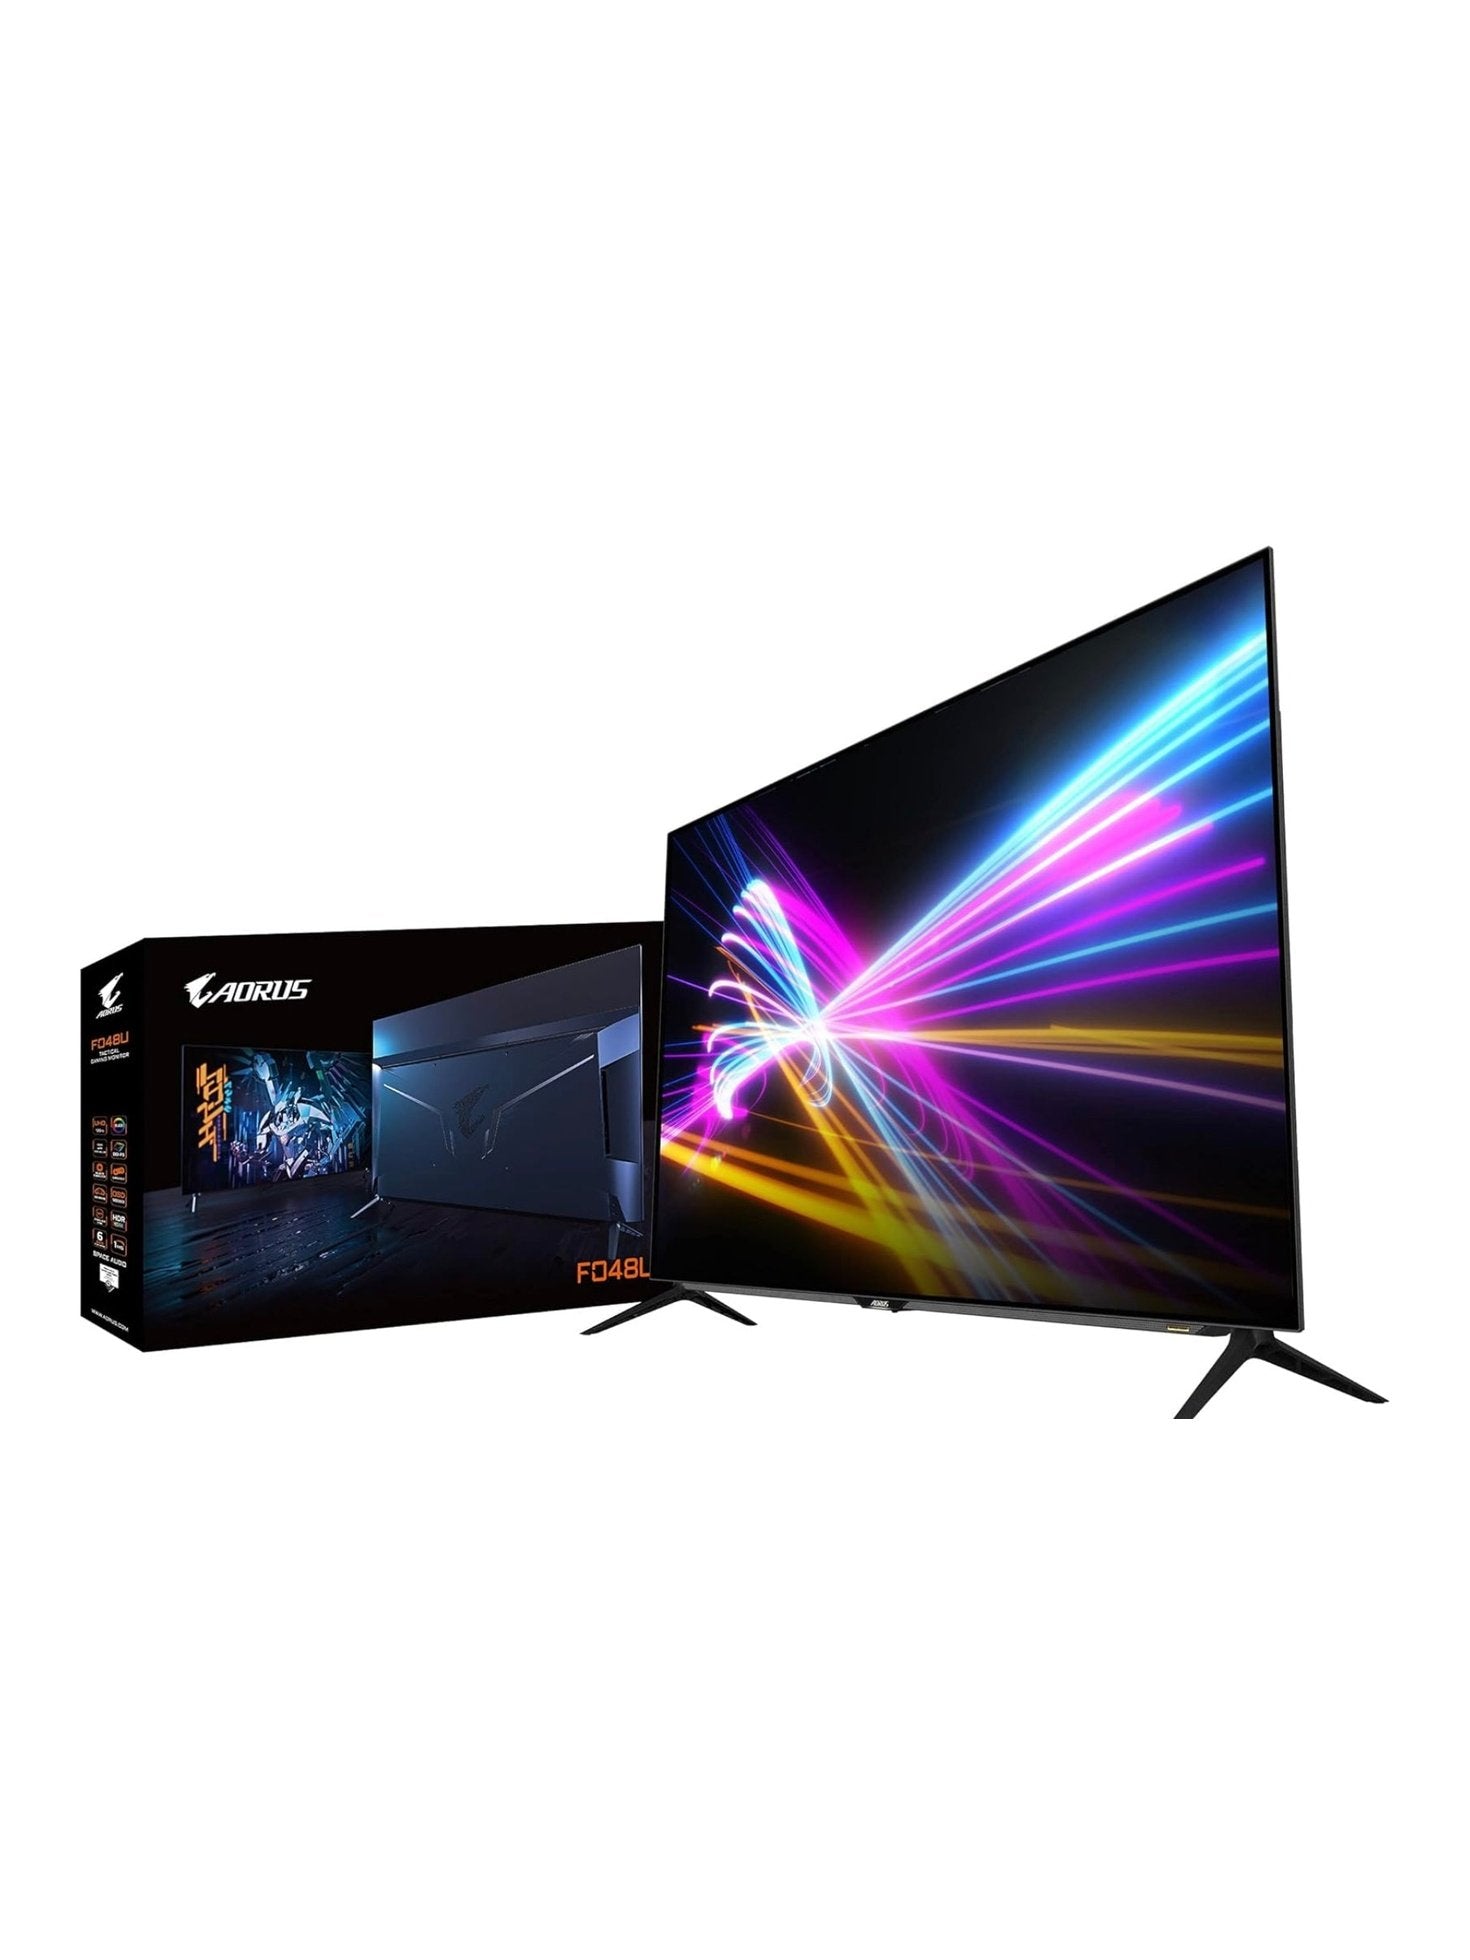 AORUS FO48U 48" 4K OLED Gaming Monitor, 3840x2160 , 120 Hz Refresh Rate, 1ms Response Time (GTG), 1x Display Port 1.4, 2x HDMI 2.1, 2x USB 3.0, with USB Type-C, Space Audio